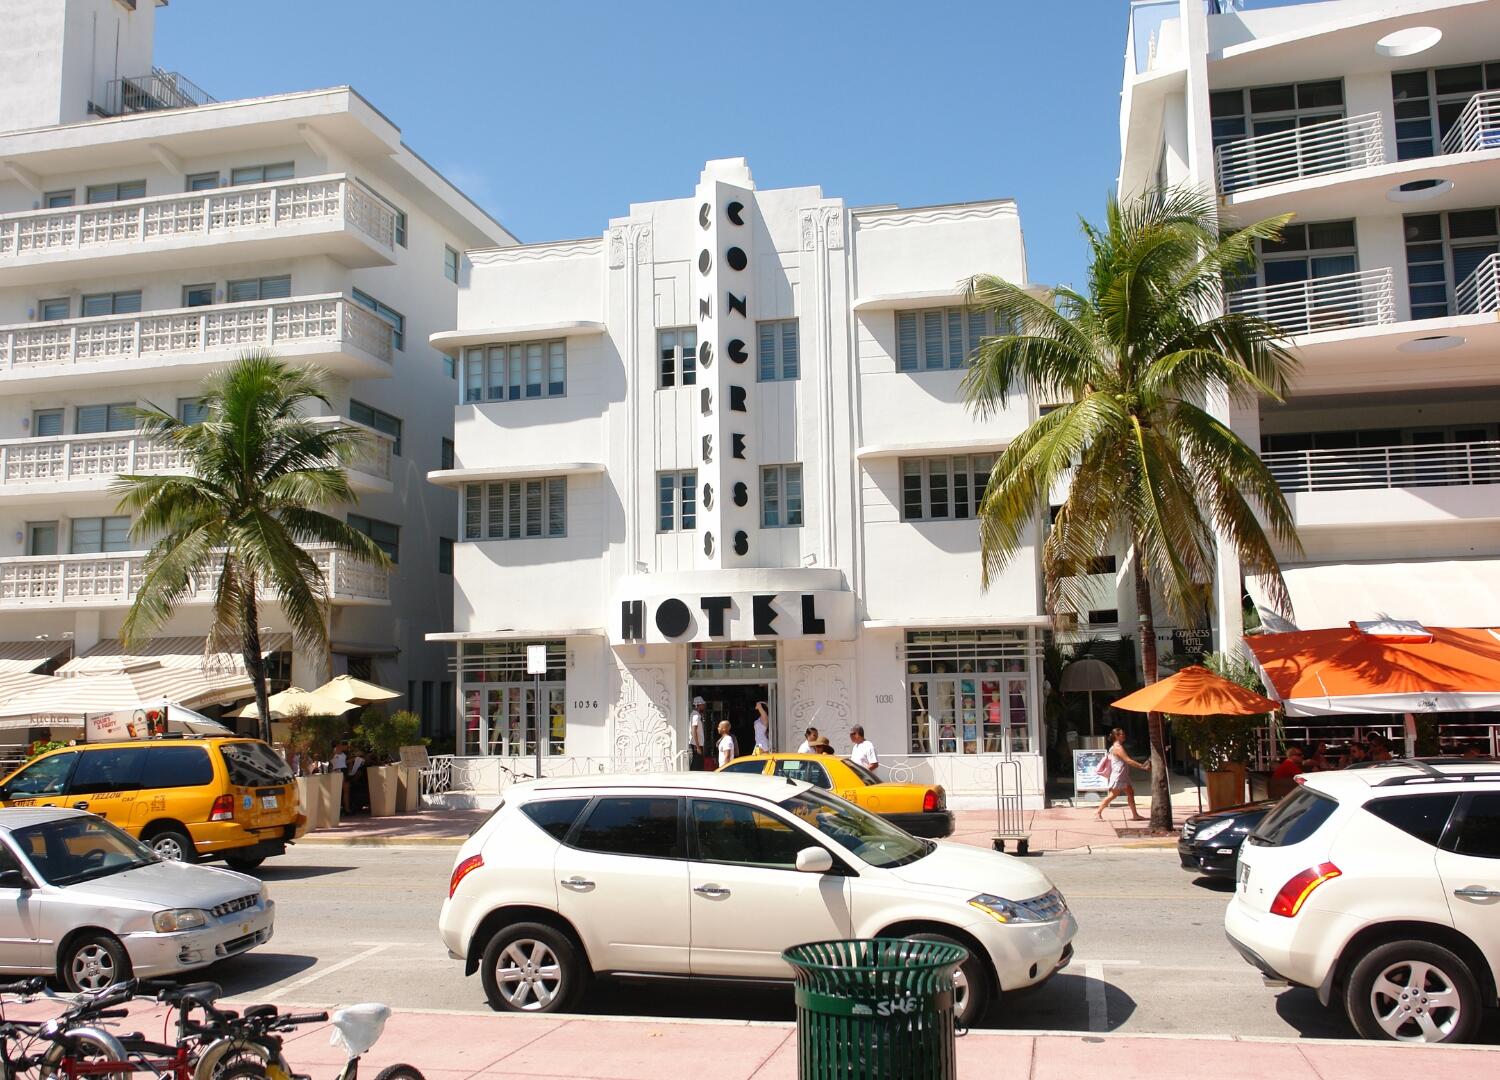 A street scene with cars parked in front of a hotel, ideal for Miami Food Tours and Group Tours.